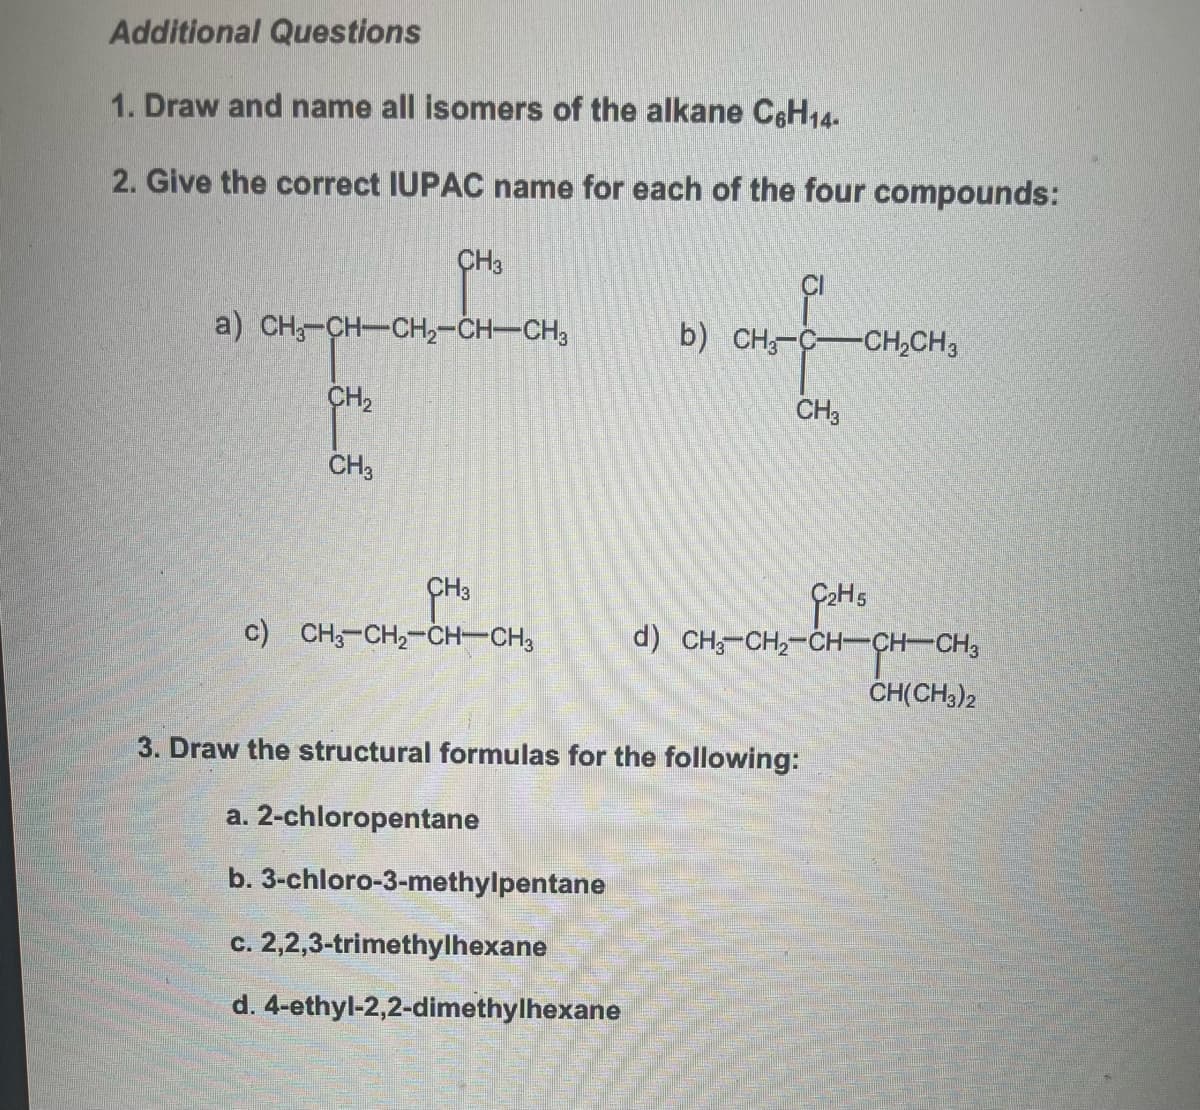 Additional Questions
1. Draw and name all isomers of the alkane C6H14-
2. Give the correct IUPAC name for each of the four compounds:
CH3
a) CH3-CH—CH,CHCH3
CH₂
CH3
c) CH3-CH₂-CH-CH3
CH3
c. 2,2,3-trimethylhexane
d. 4-ethyl-2,2-dimethylhexane
CI
b) CH3-C- -CH₂CH3
CH3
3. Draw the structural formulas for the following:
a. 2-chloropentane
b. 3-chloro-3-methylpentane
G₂H5
d) CHỖ CH,CHCHCH3
CH(CH3)2